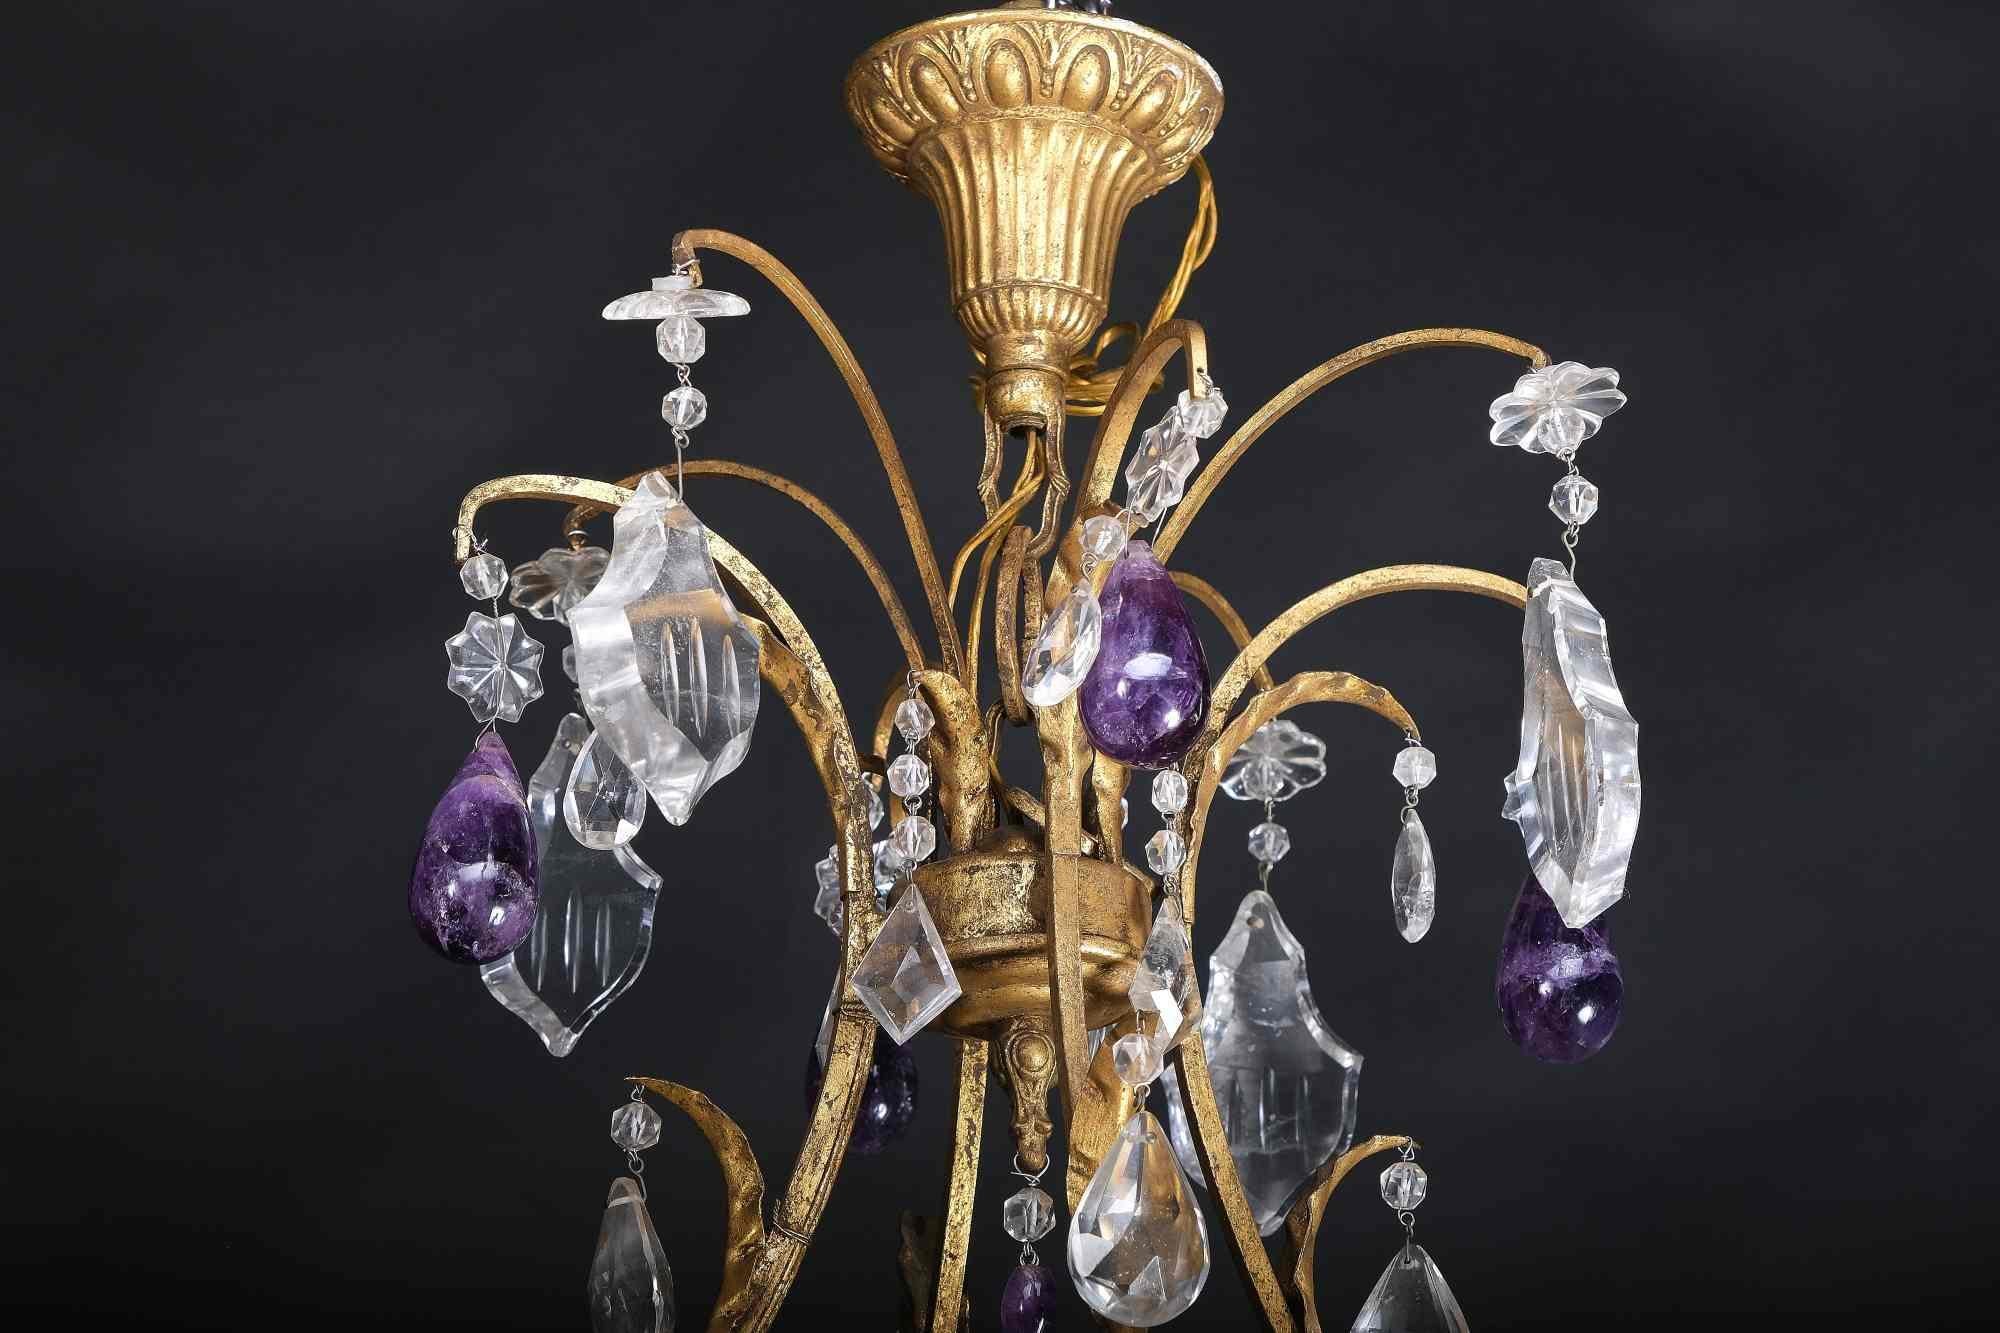 Extraordinary Italian Chandelier in Rock Crystal and Amethyst, Rome 19th Century For Sale 1